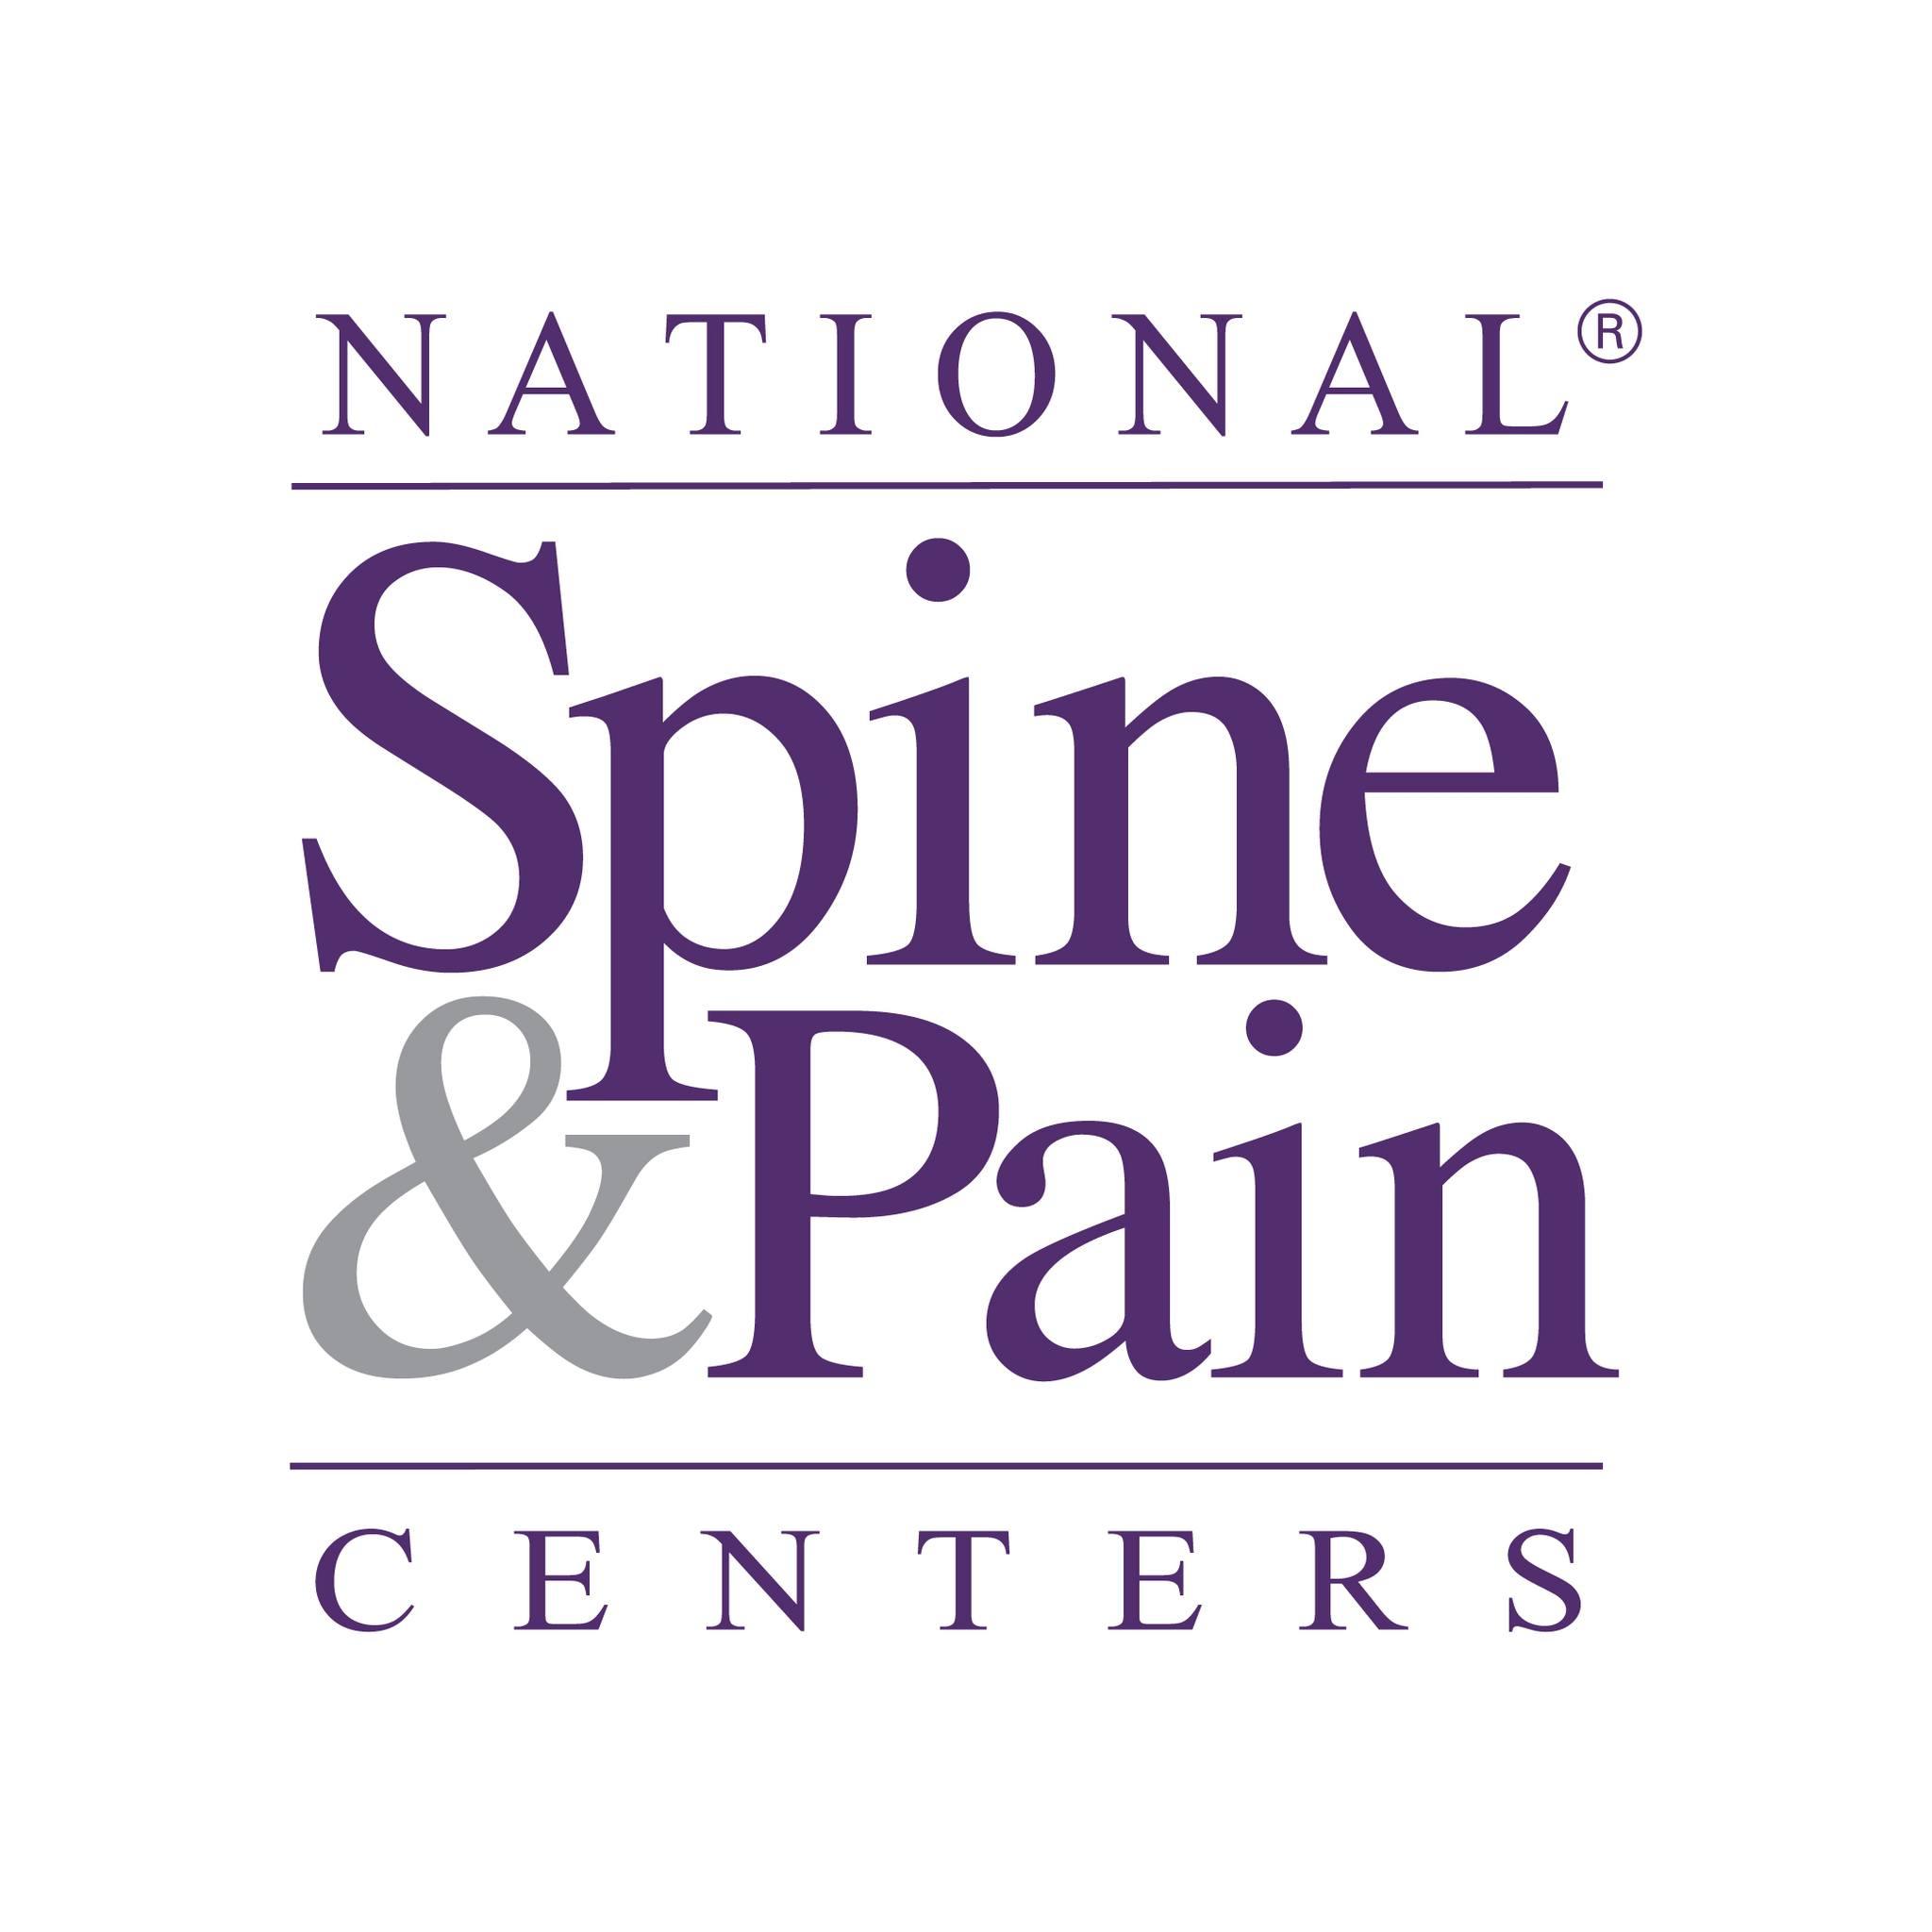 National Spine & Pain Centers - Bowie - Bowie, MD 20715 - (301)464-7008 | ShowMeLocal.com